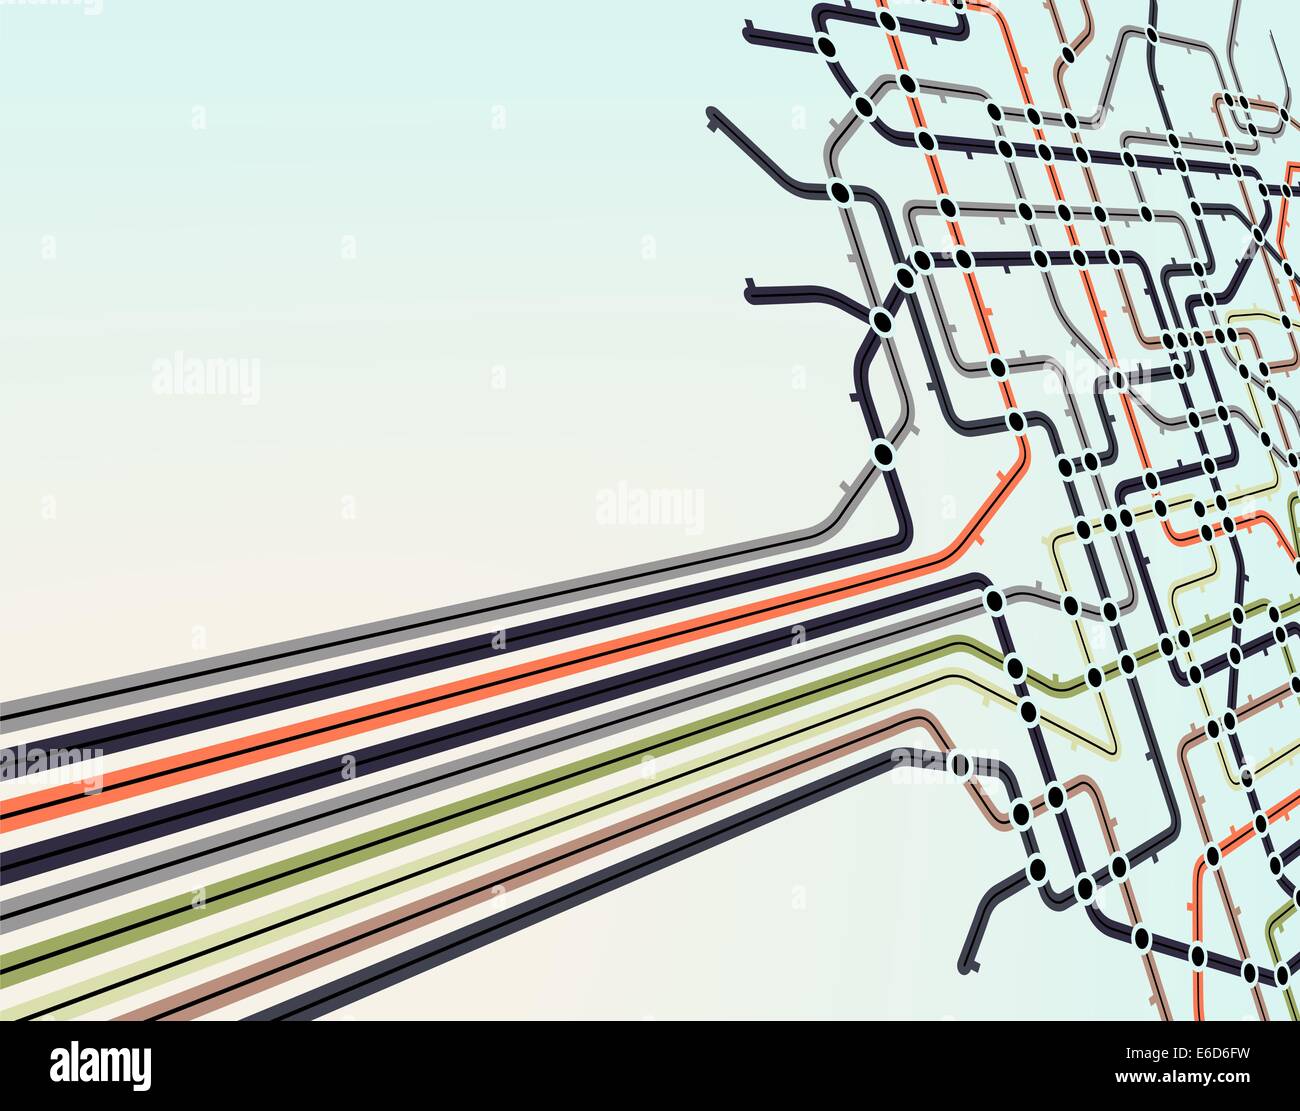 Abstract editable vector background of a subway map Stock Vector